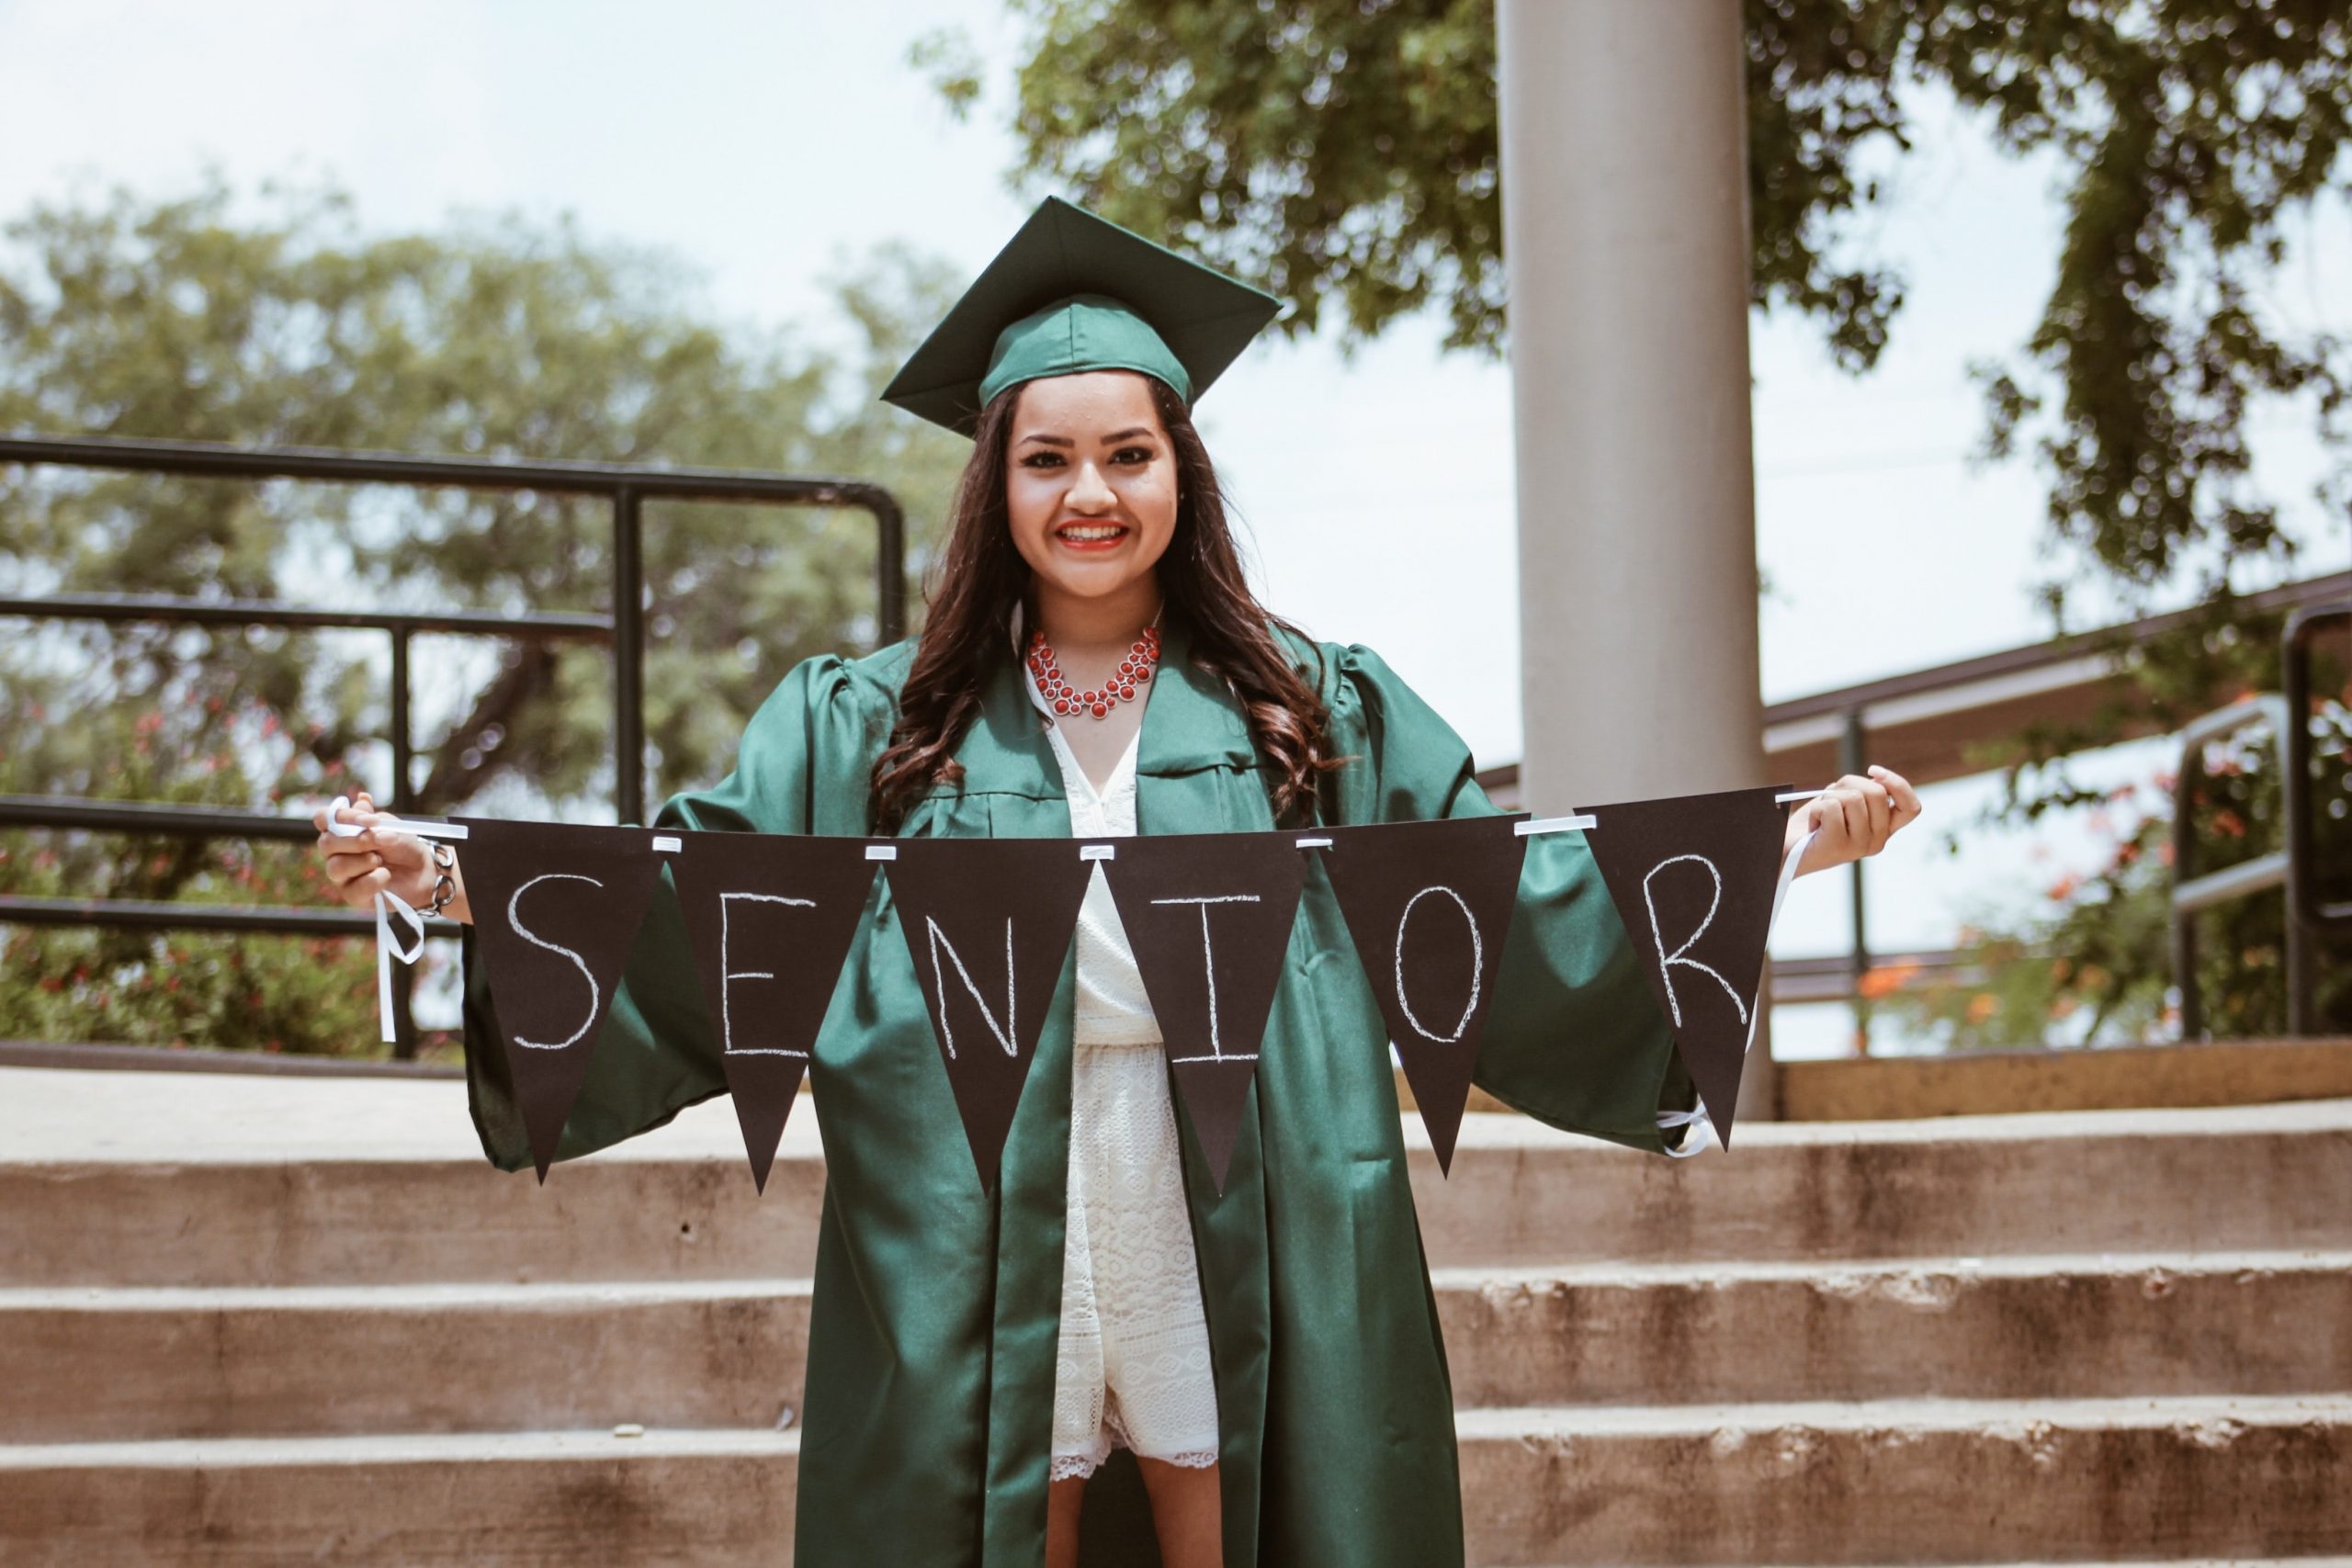 Image of teen in a green graduation cap and gown, holding a banner with "Seniors" on it. Photo by Juan Ramos on Unsplash